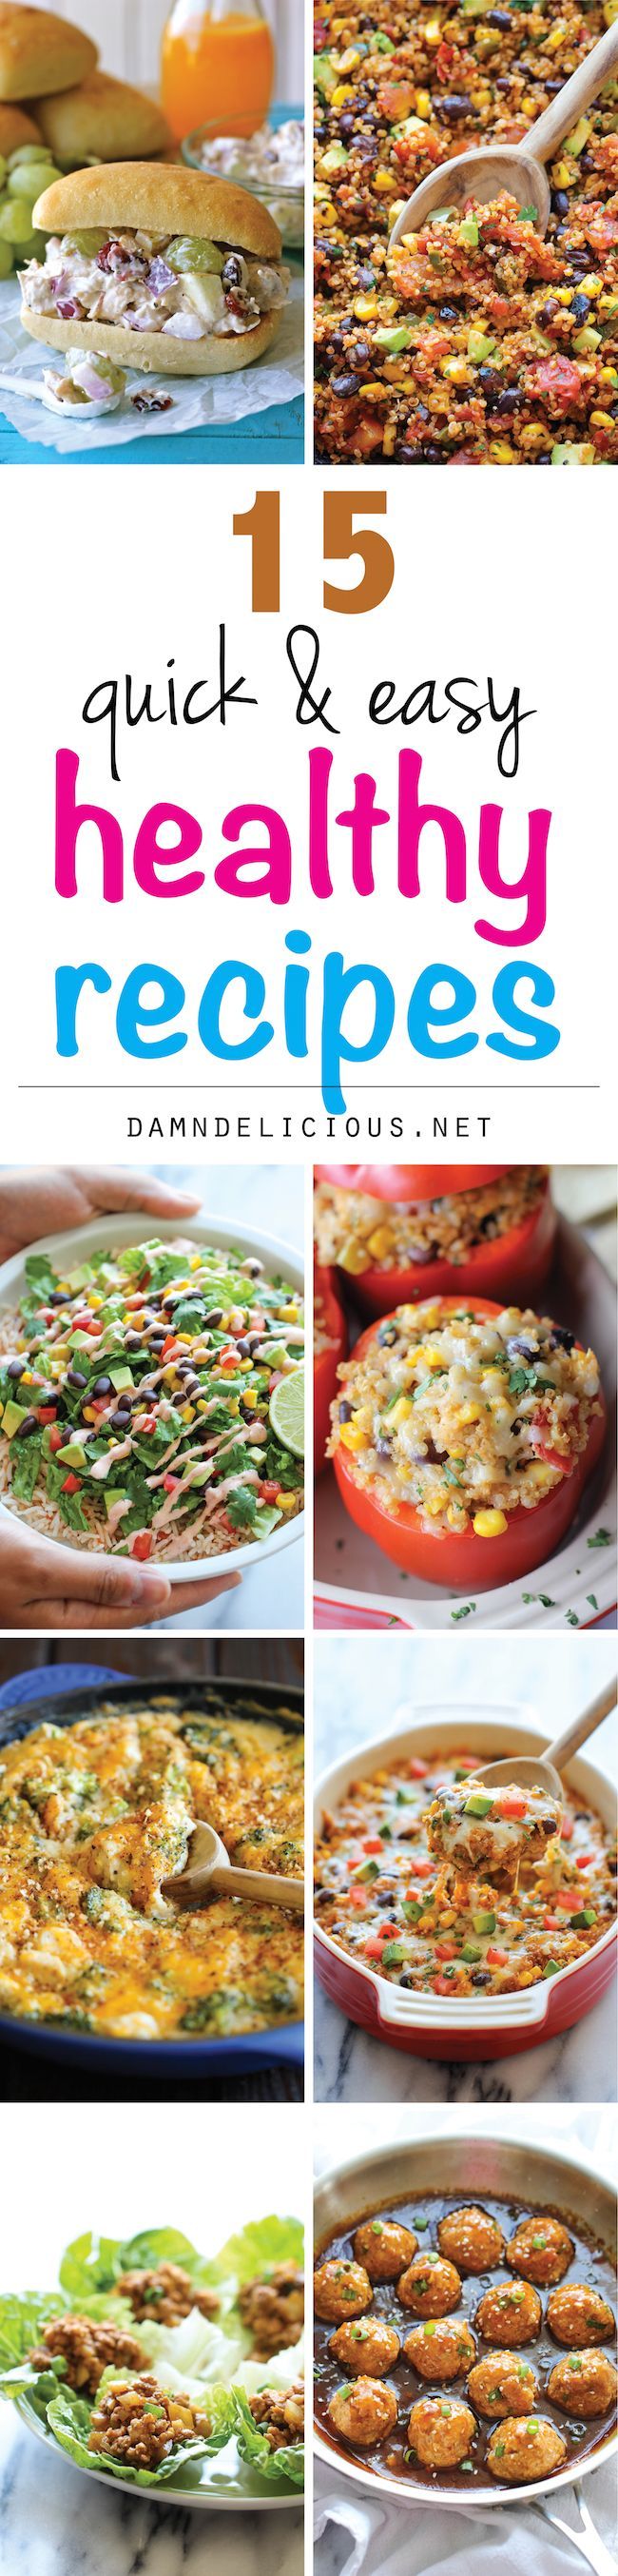 15 Quick and Easy Healthy Recipes – The best and easiest healthy, comforting recipes that aren’t boring at all. And they don’t